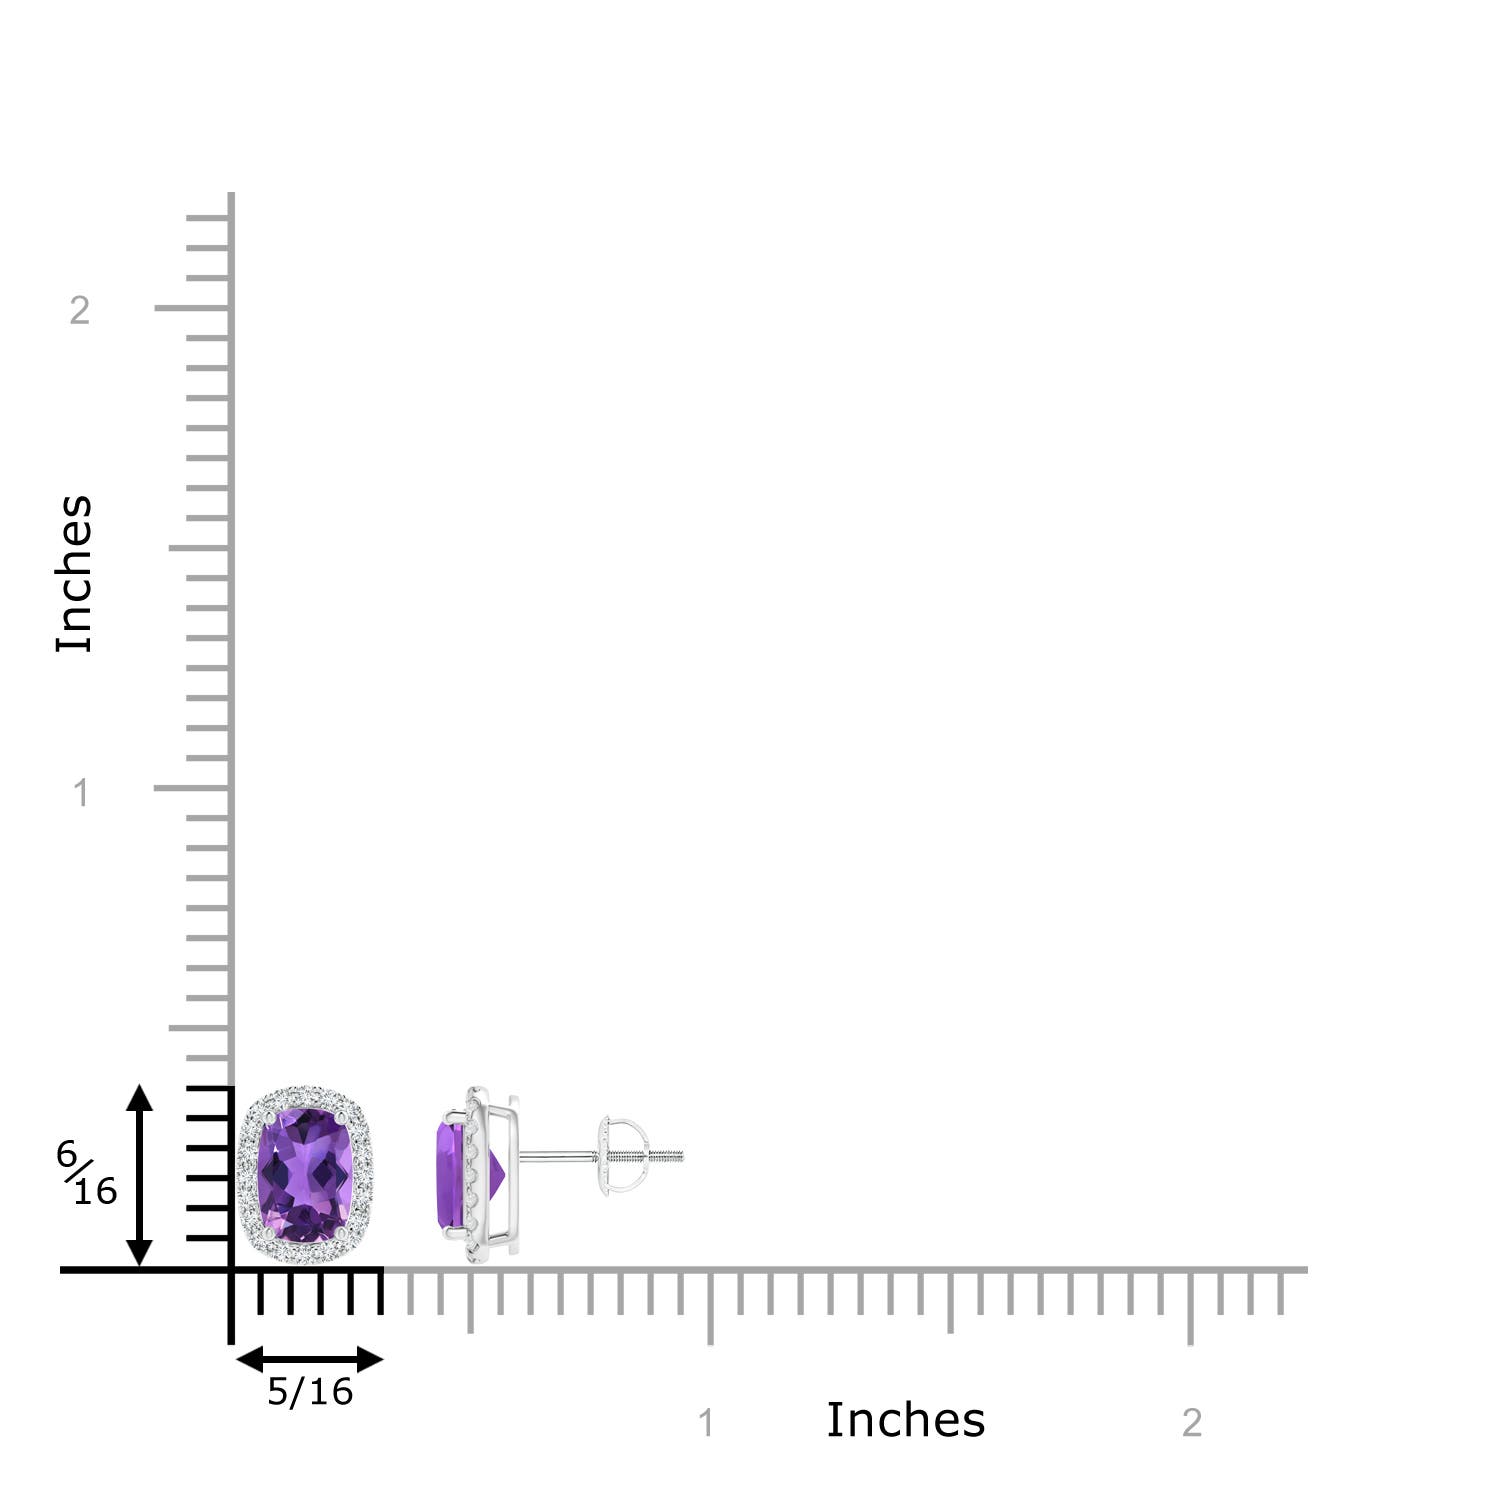 AAA - Amethyst / 1.64 CT / 14 KT White Gold